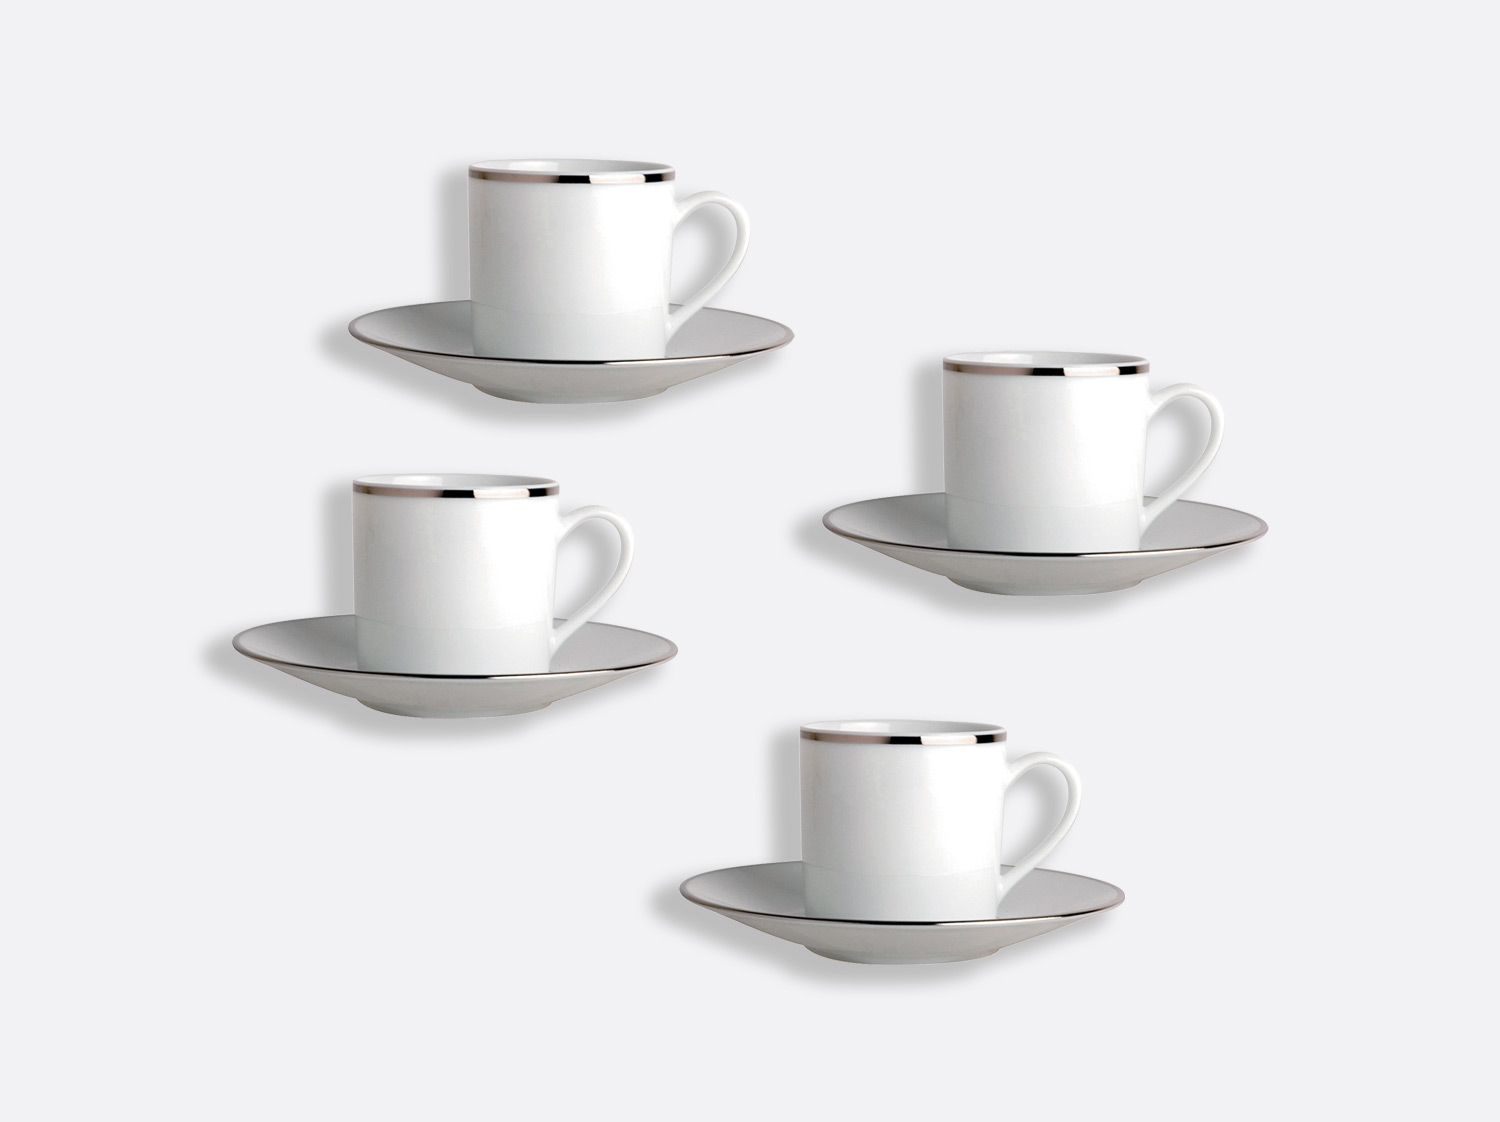 China Espresso cup and saucer gift box - 3 Oz - Set of 4 of the collection Cristal | Bernardaud